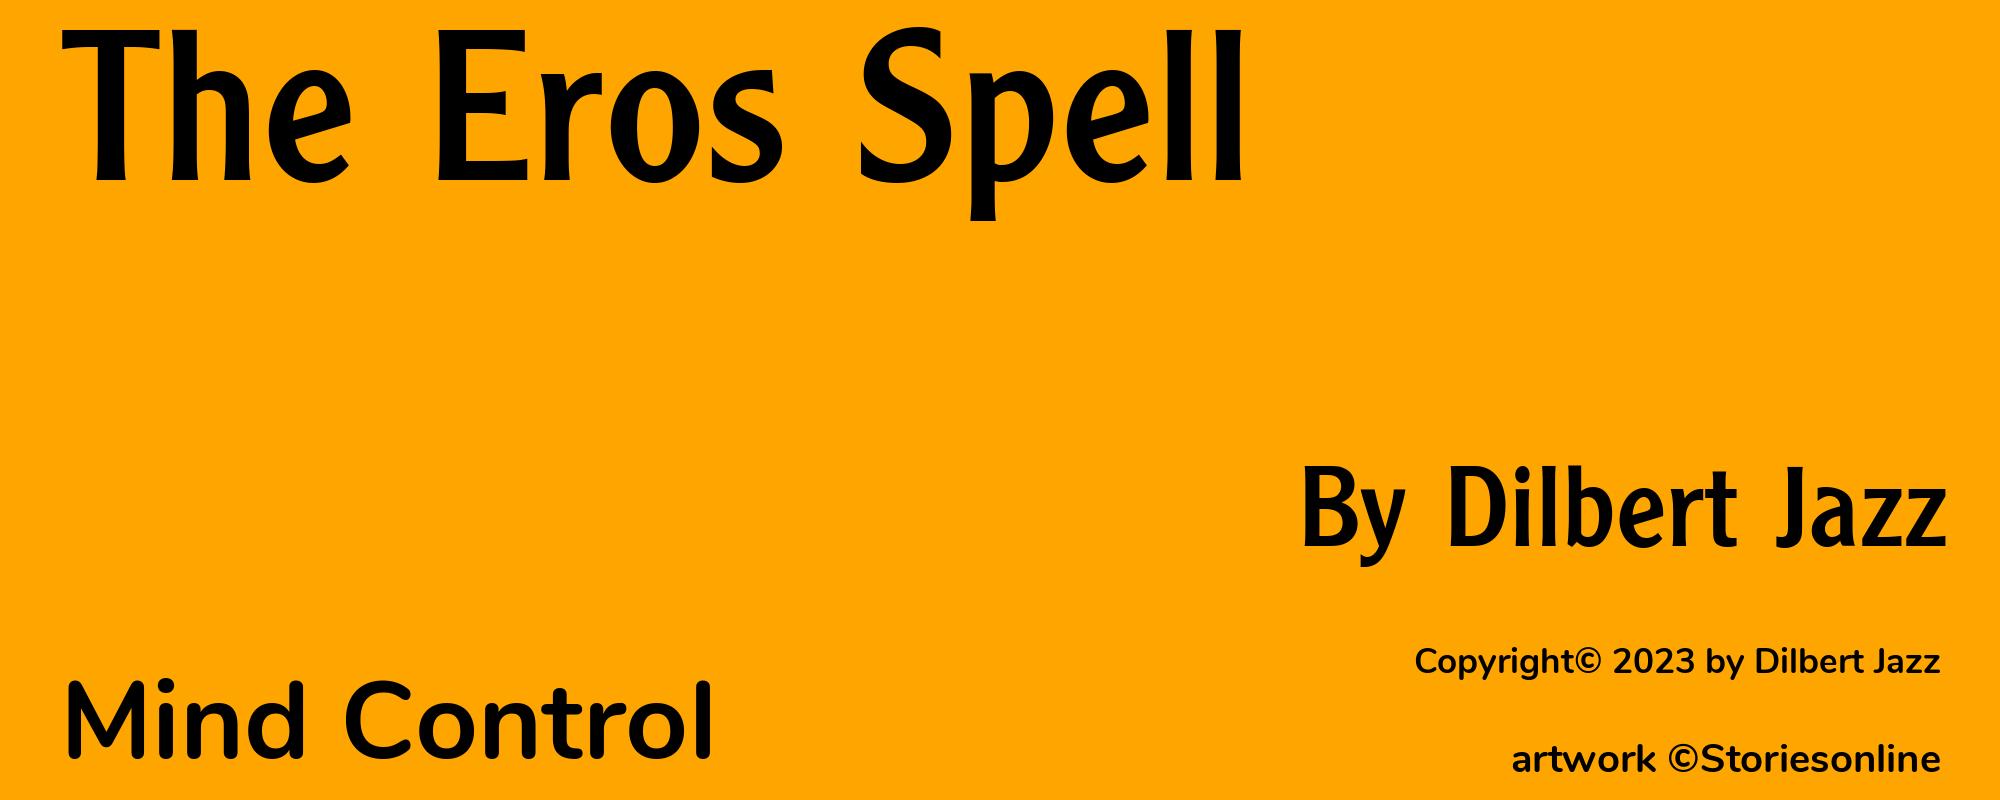 The Eros Spell - Cover